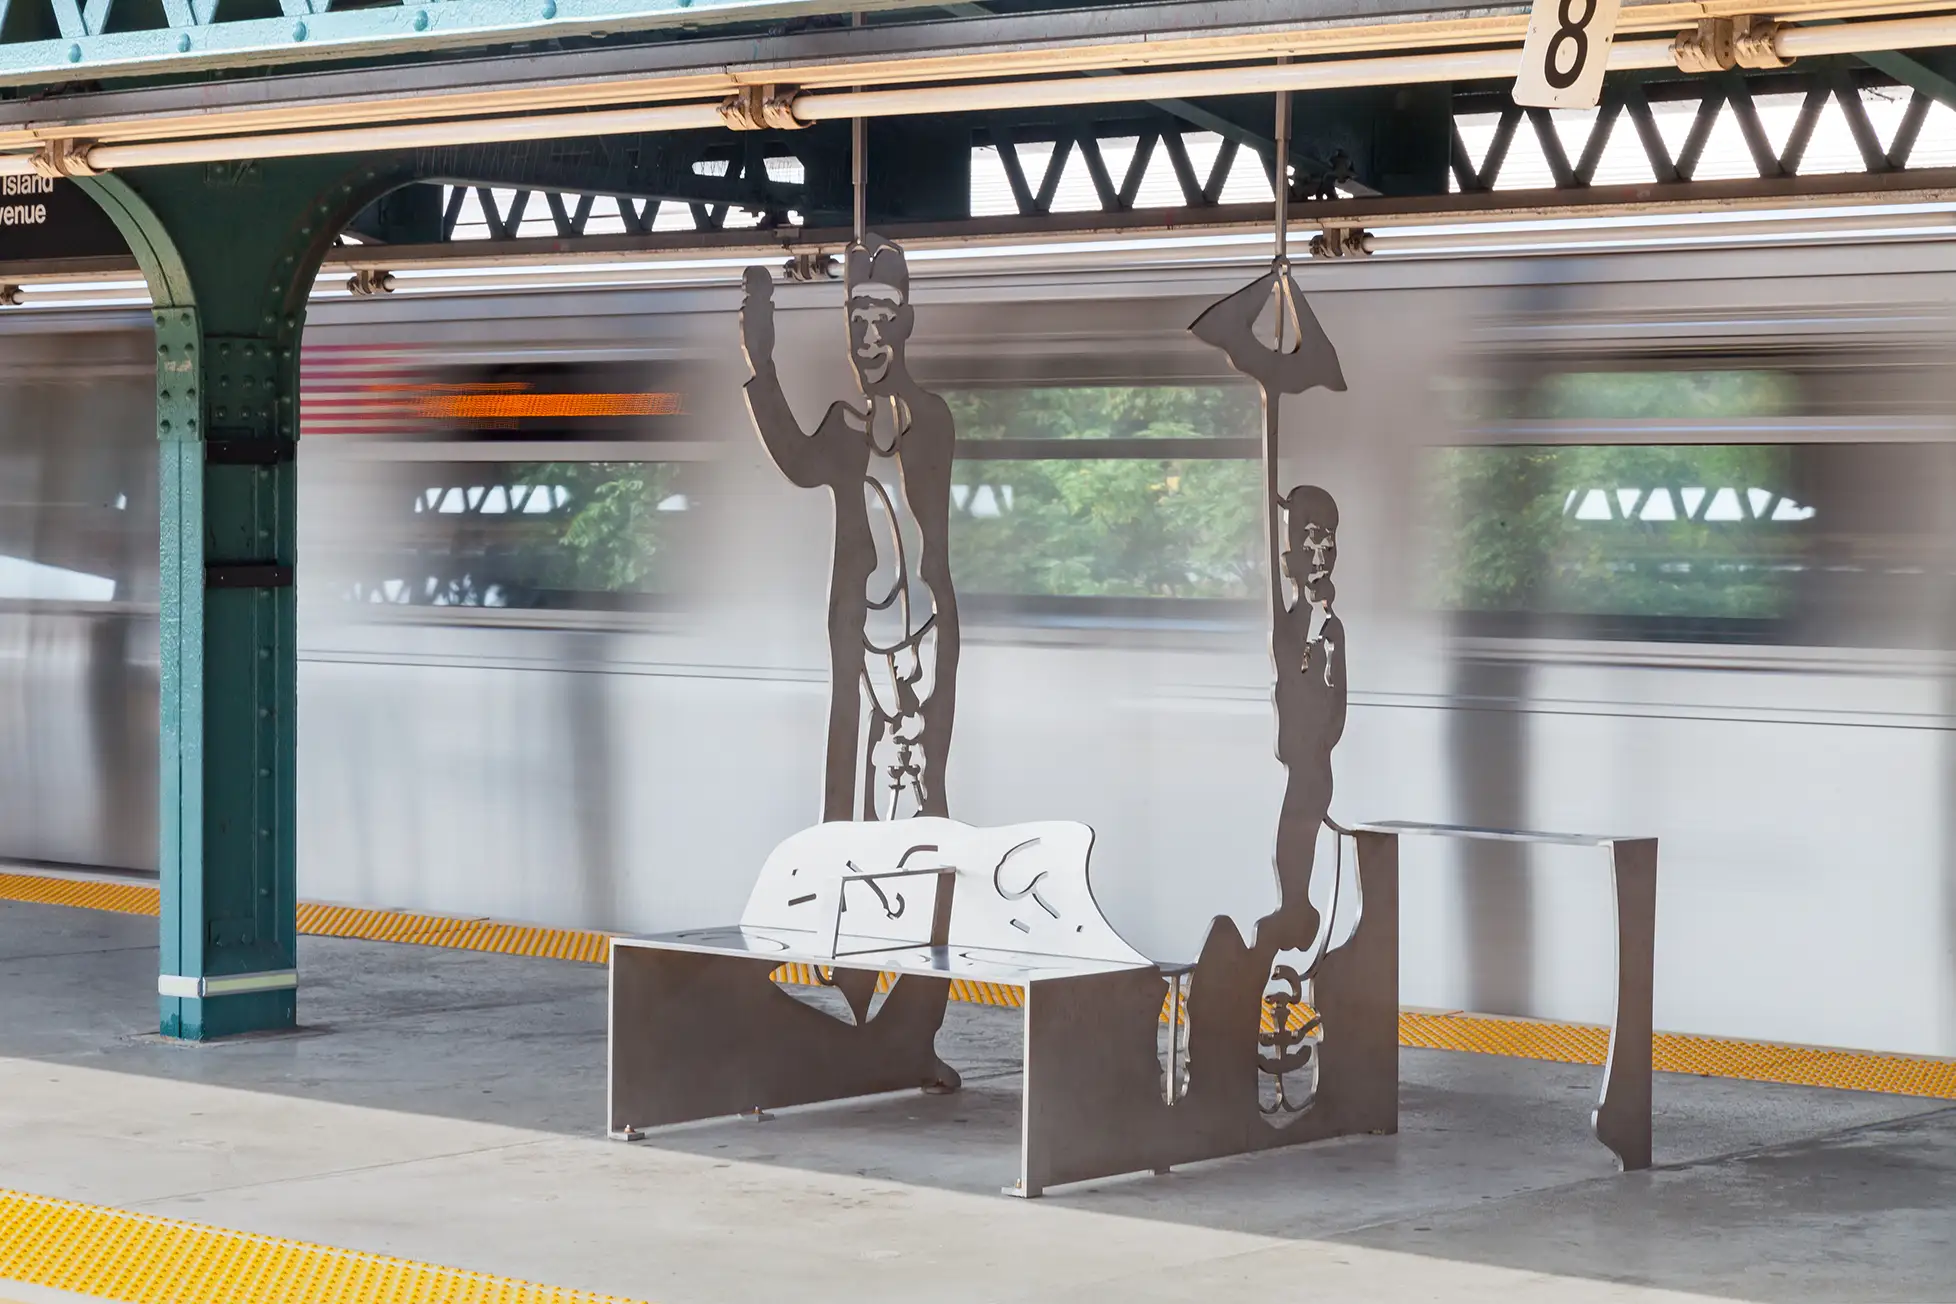 We are each others a public art installation in New York City subway part of MTA Arts and Design consisting in an ensemble of figural benches in stainless steel and whismical windscreens permanently installed in Brooklyn on 18th Avenue and Kings Highway stations in Brooklyn